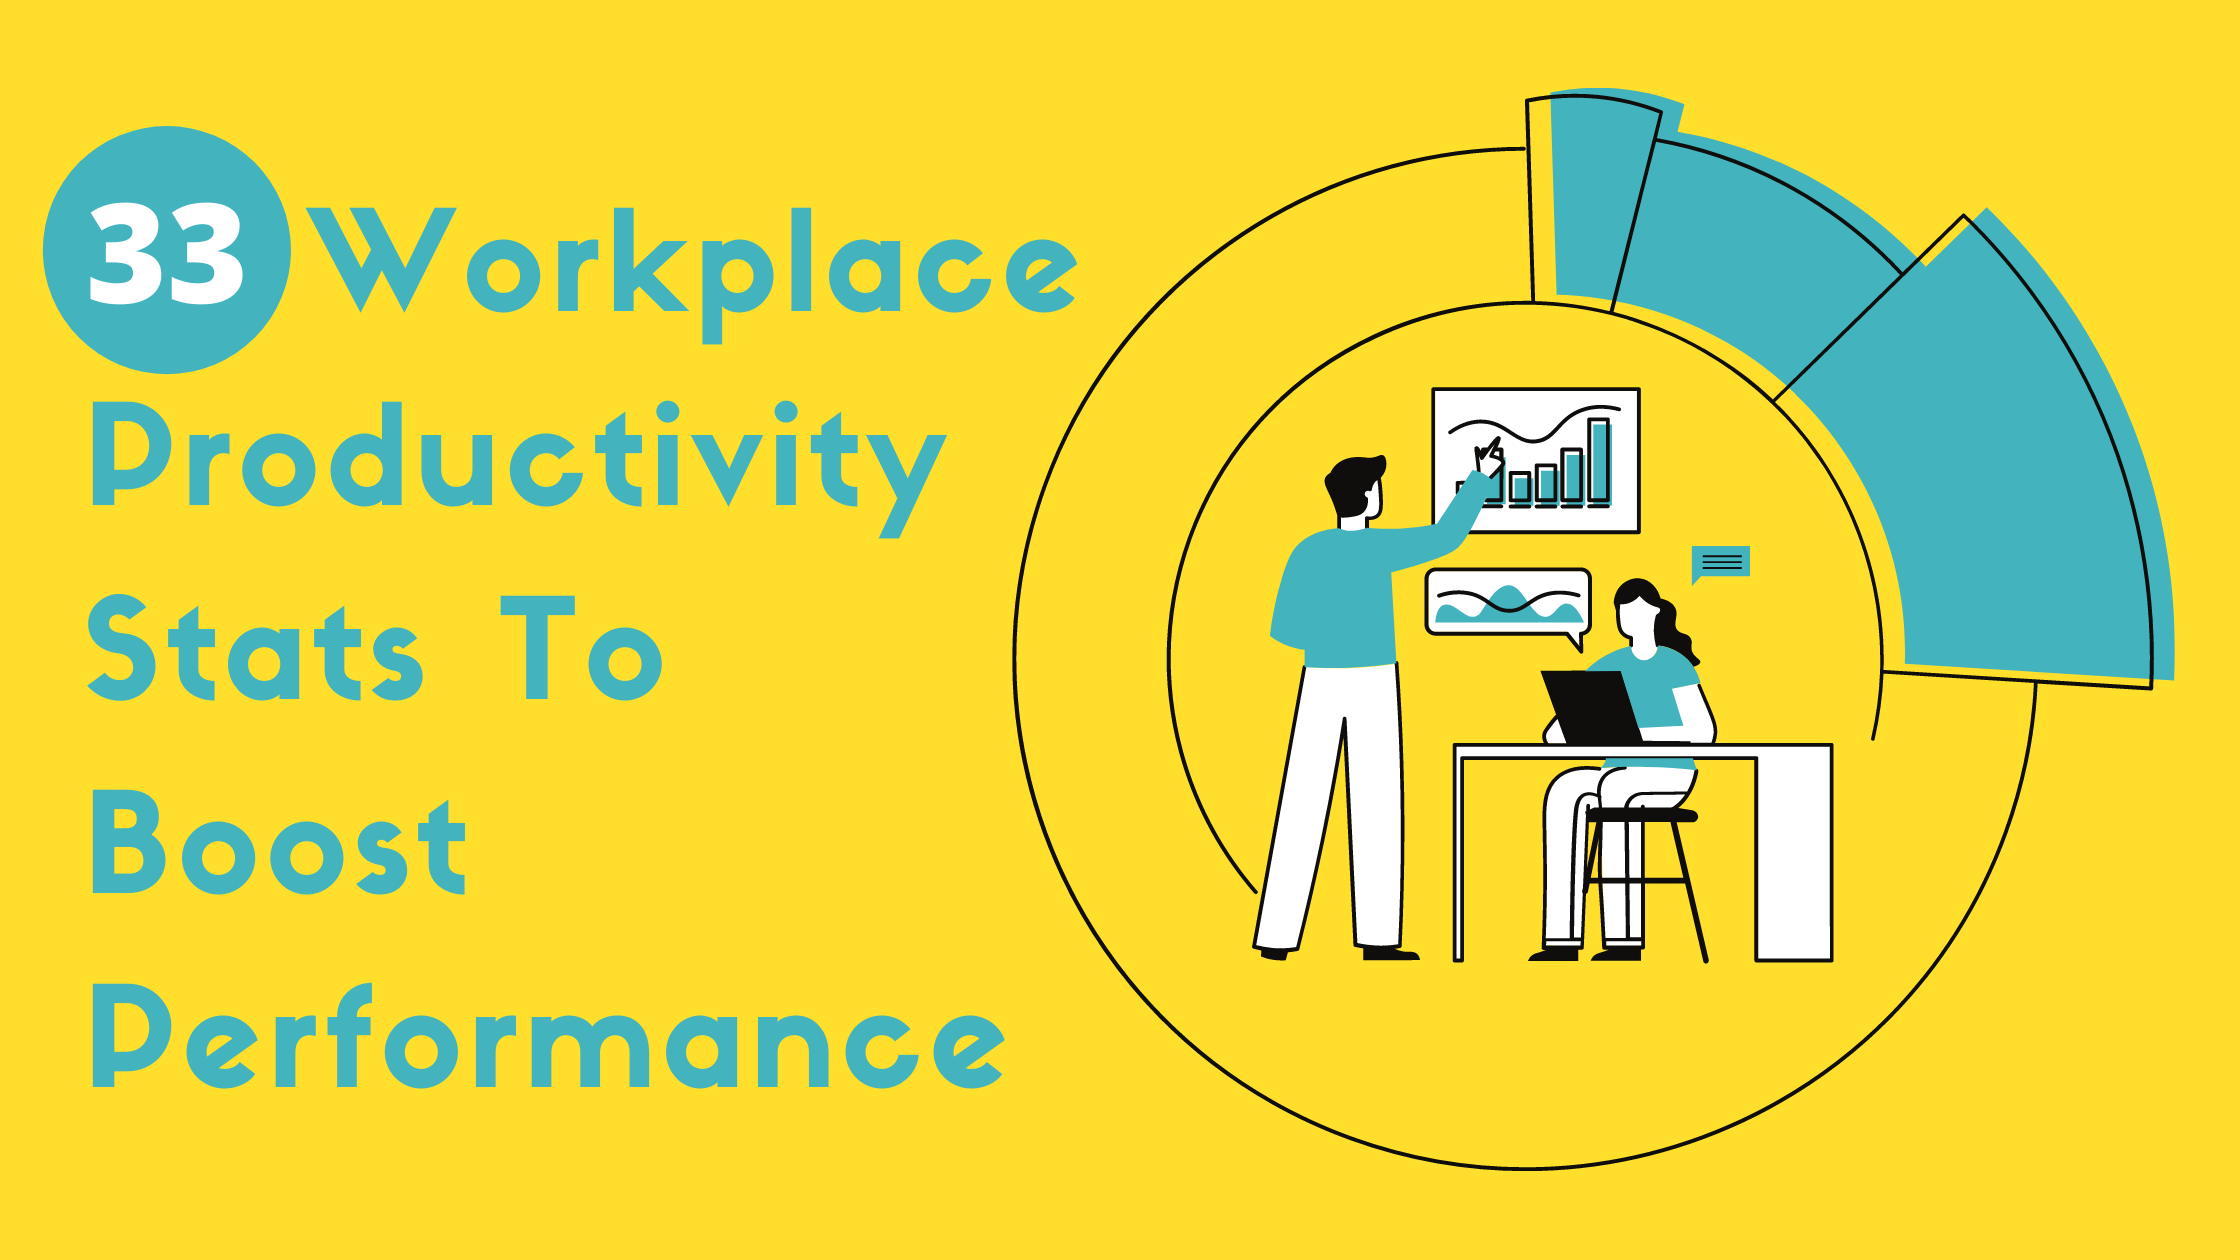 33 Workplace Productivity Statistics You Need to Pay Attention to Right Now